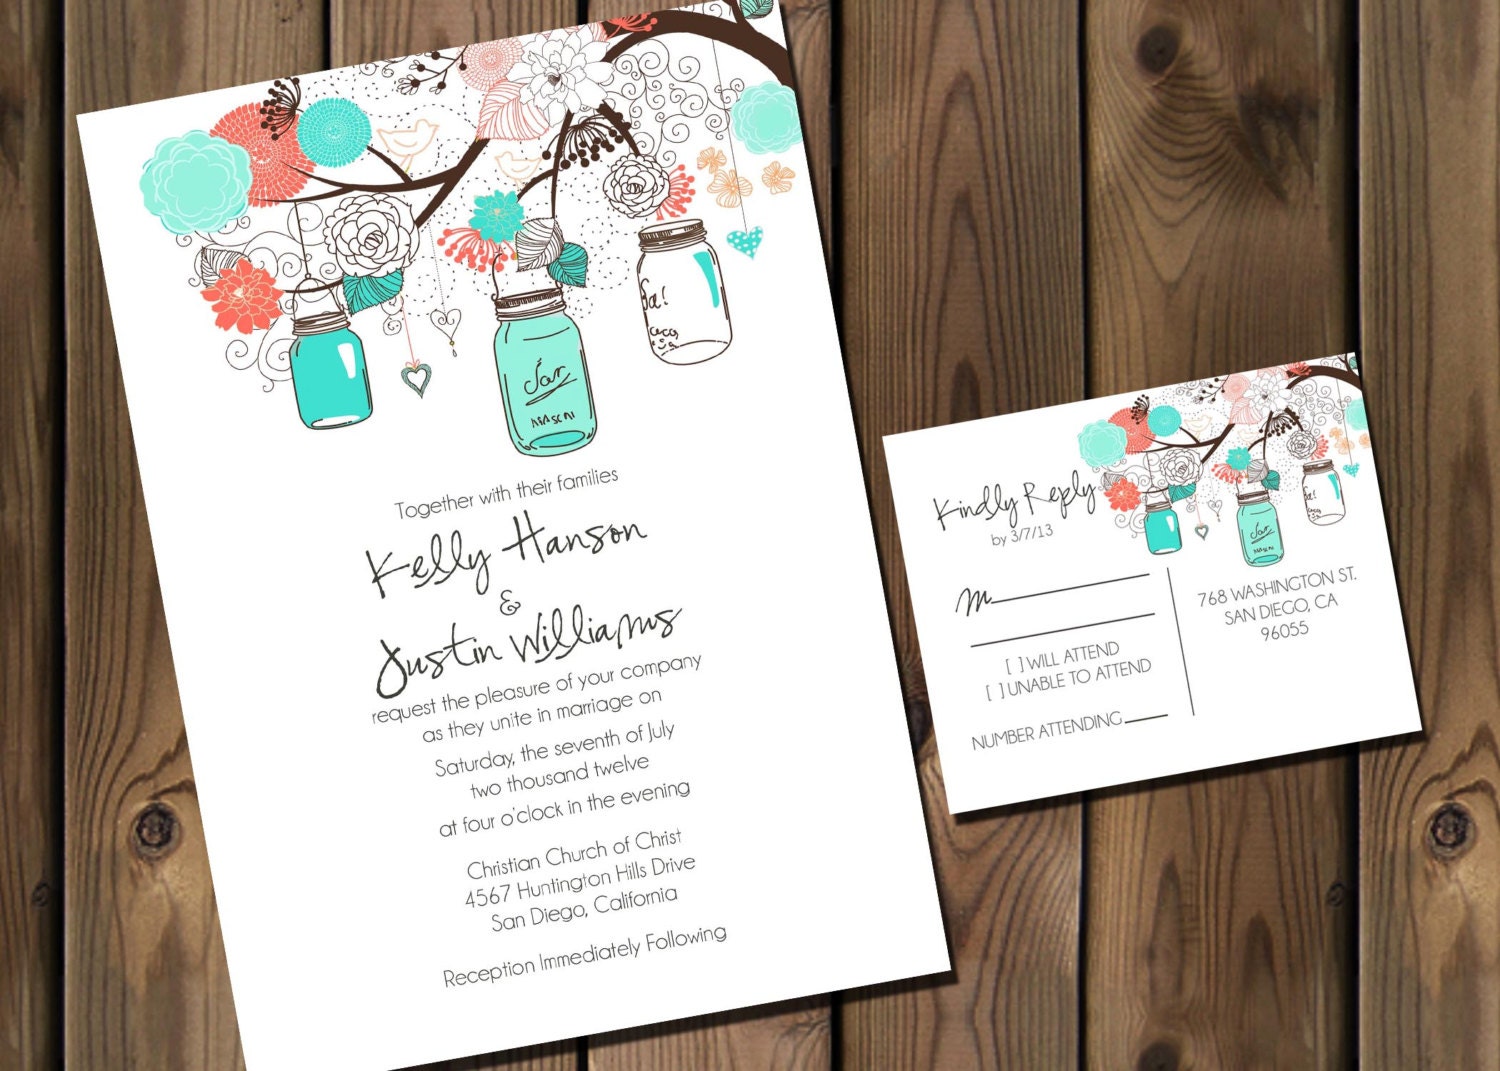 Wedding Invitation Package with Flowers and Jars by RockStarPress